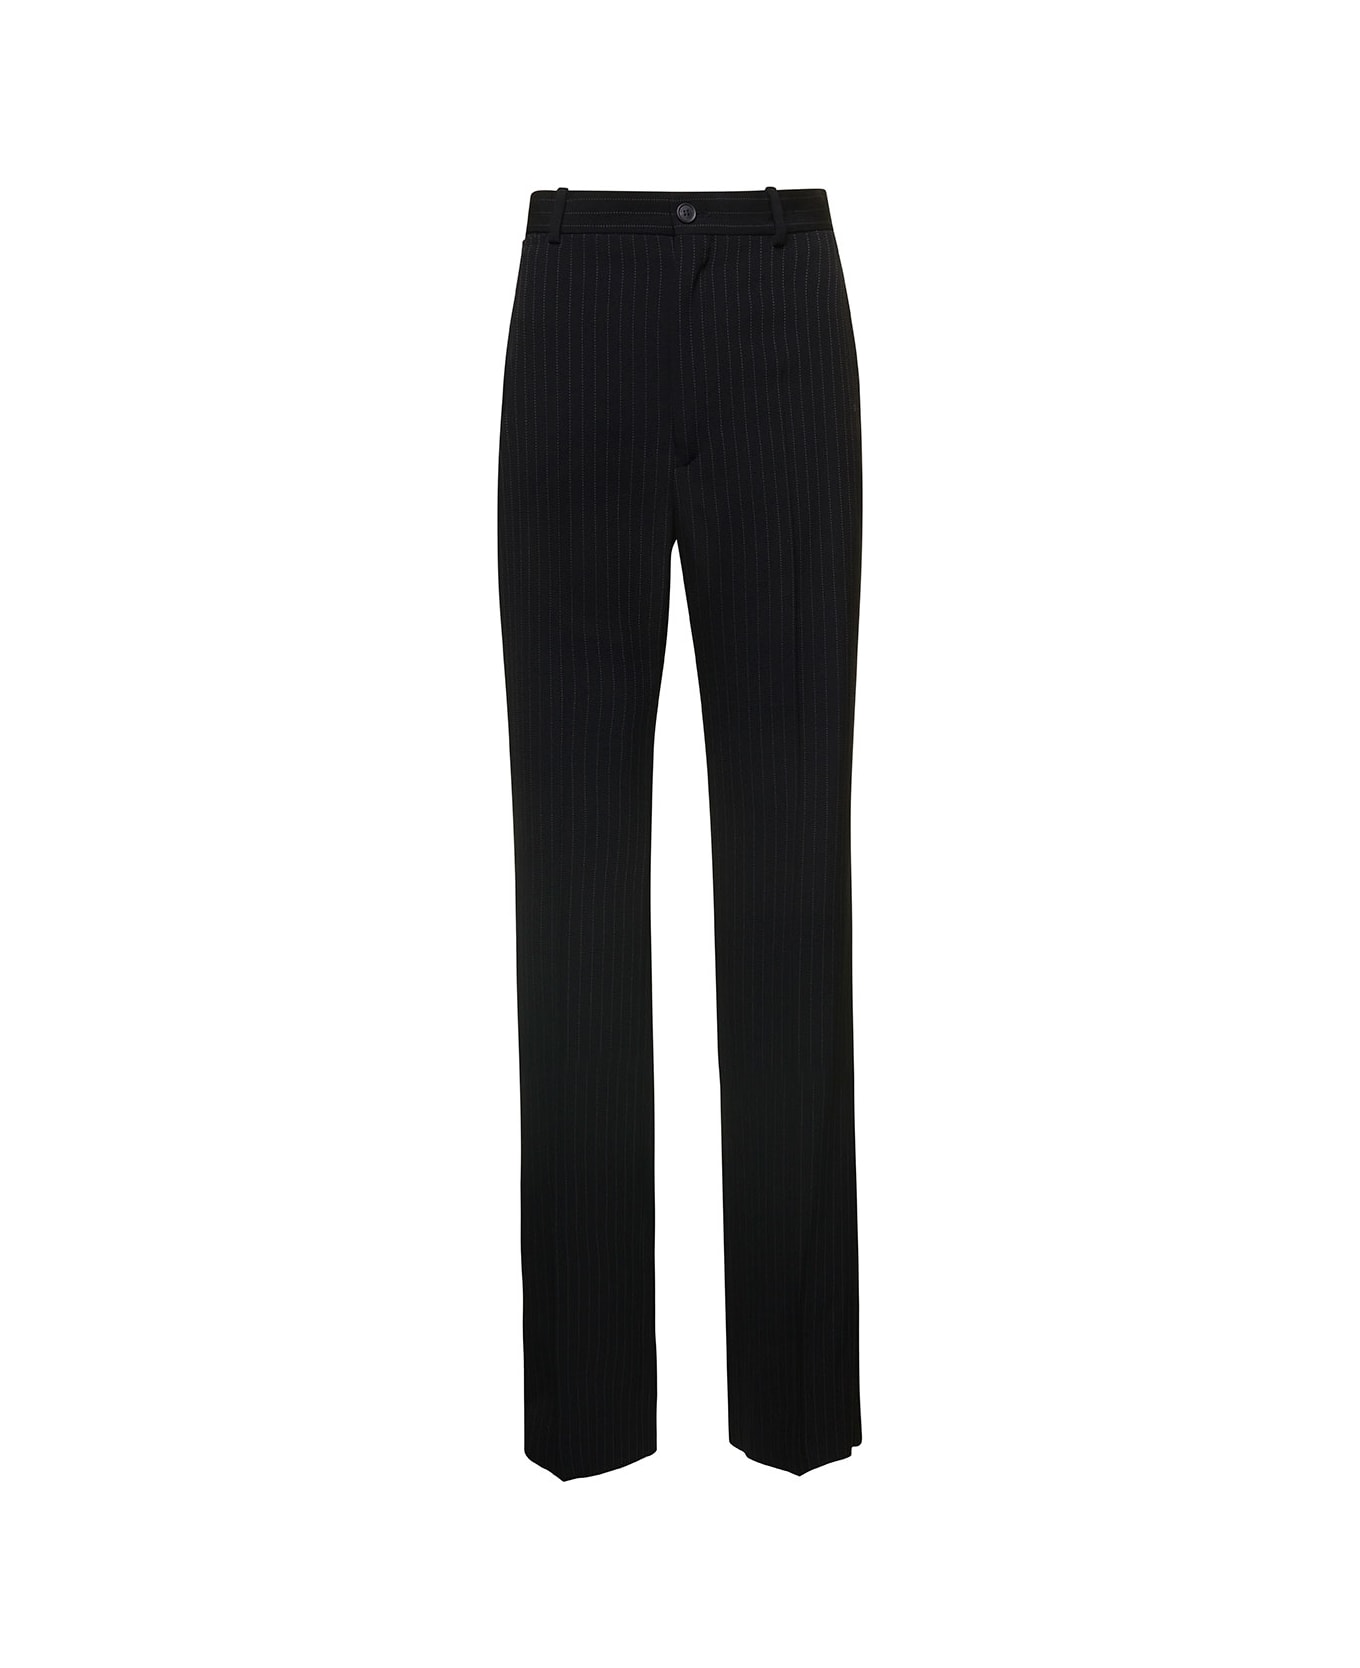 Balenciaga Long Black Pinstripedtrousers With Button And Zip Closure In Wool Woman - Black